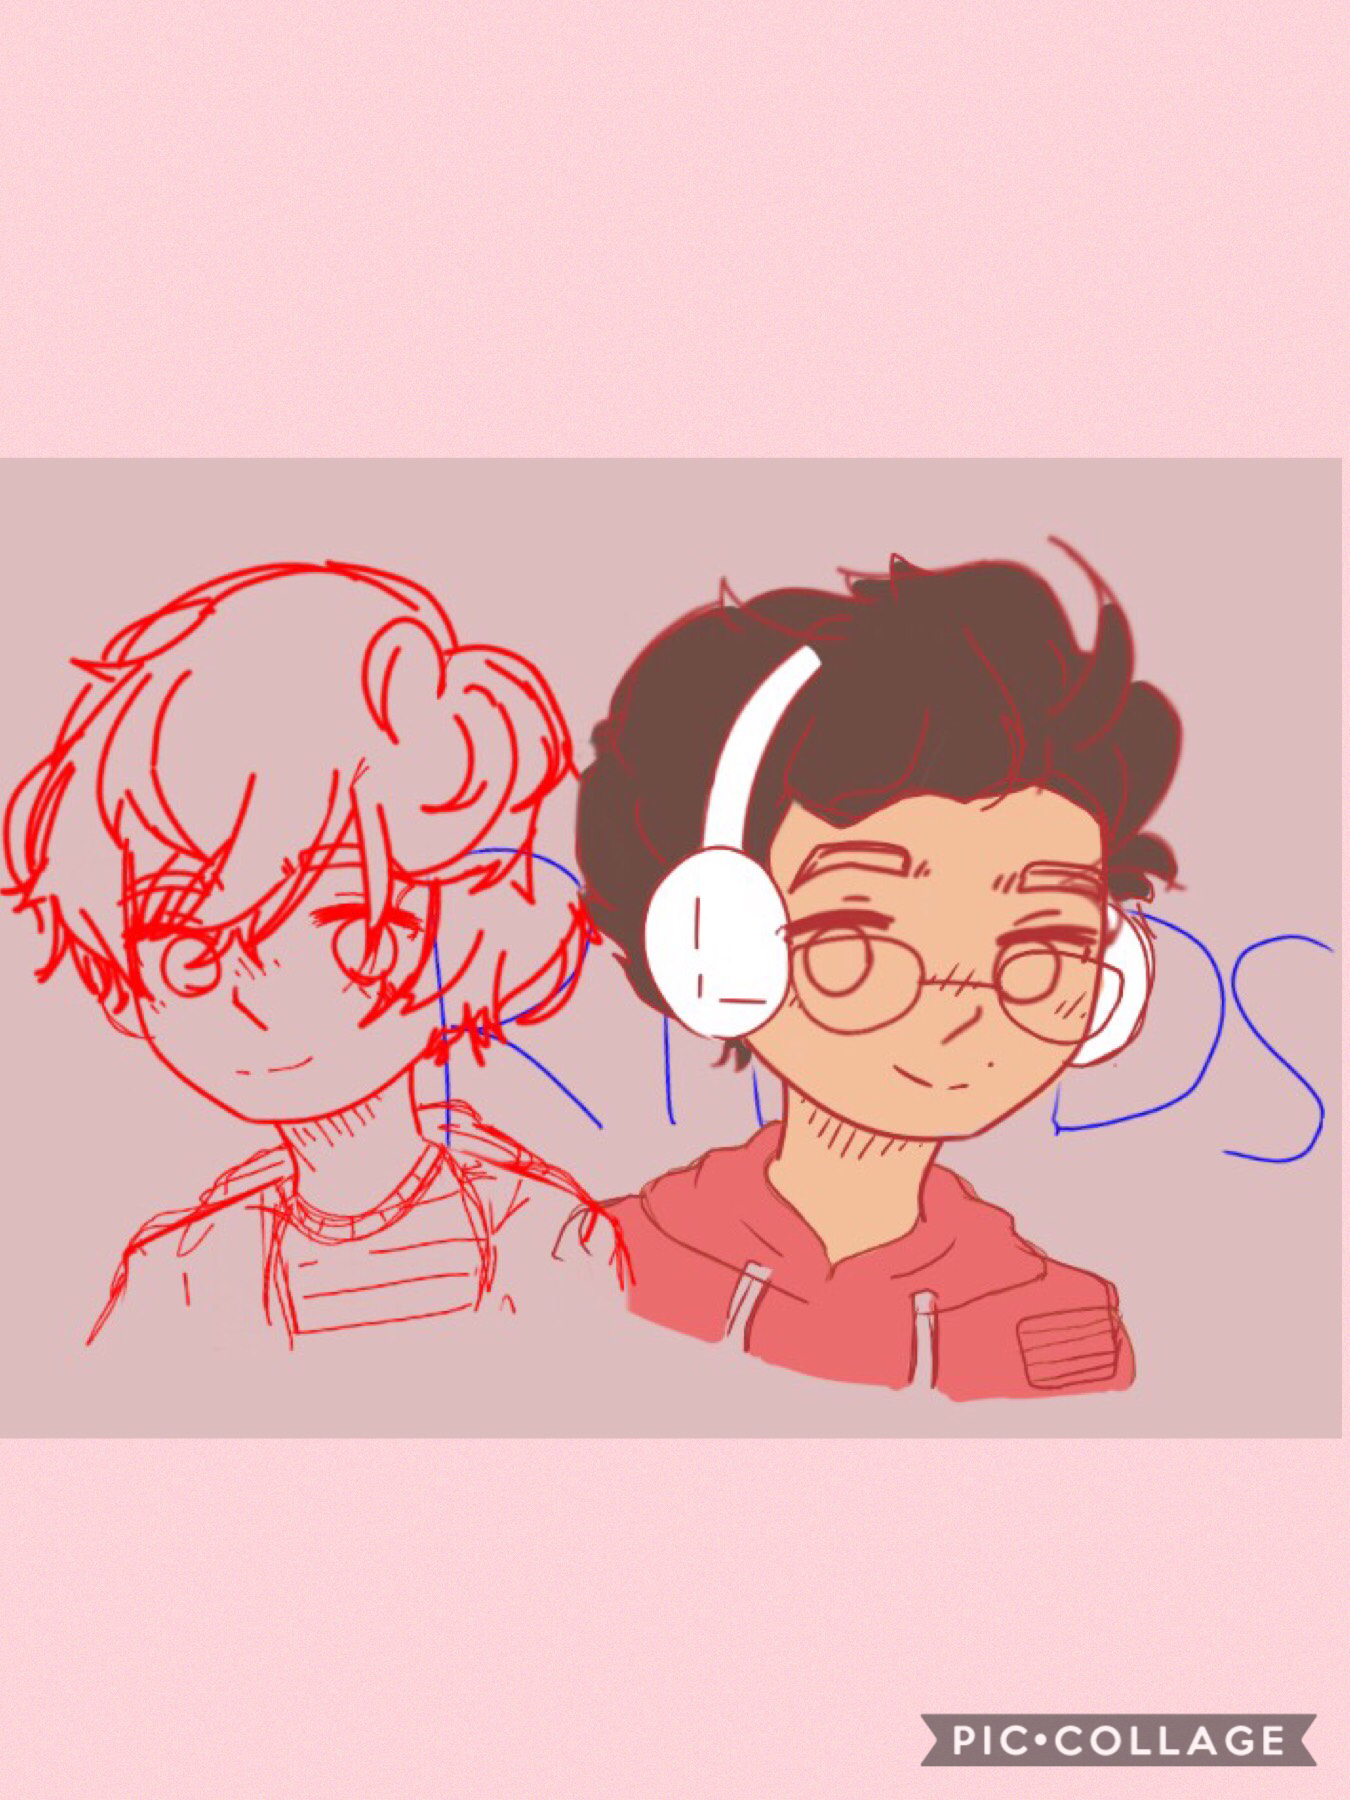 boyf riends wip (tap)
hhh i got a dummy idea while working on this for a slimerancher(?) spin-off AU and now I really want to work on that
